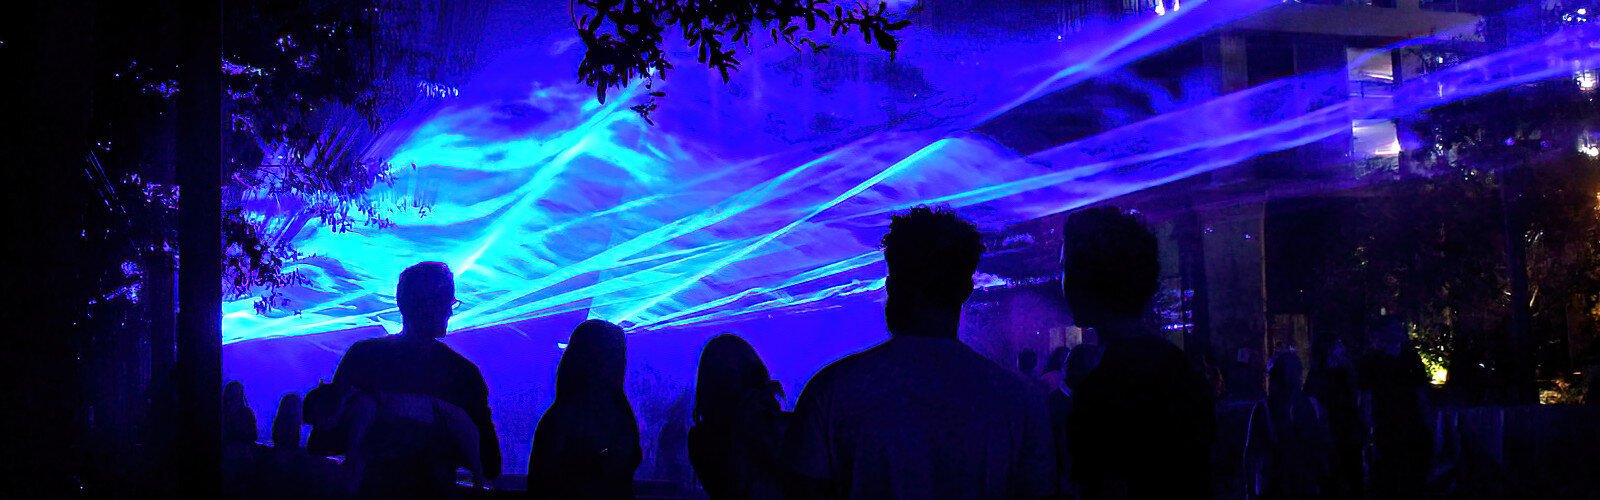 Open to the public and free to attend, the amazing WATERLICHT installation of Studio Roosegaarde at Water Street Tampa was its third appearance in the U.S.